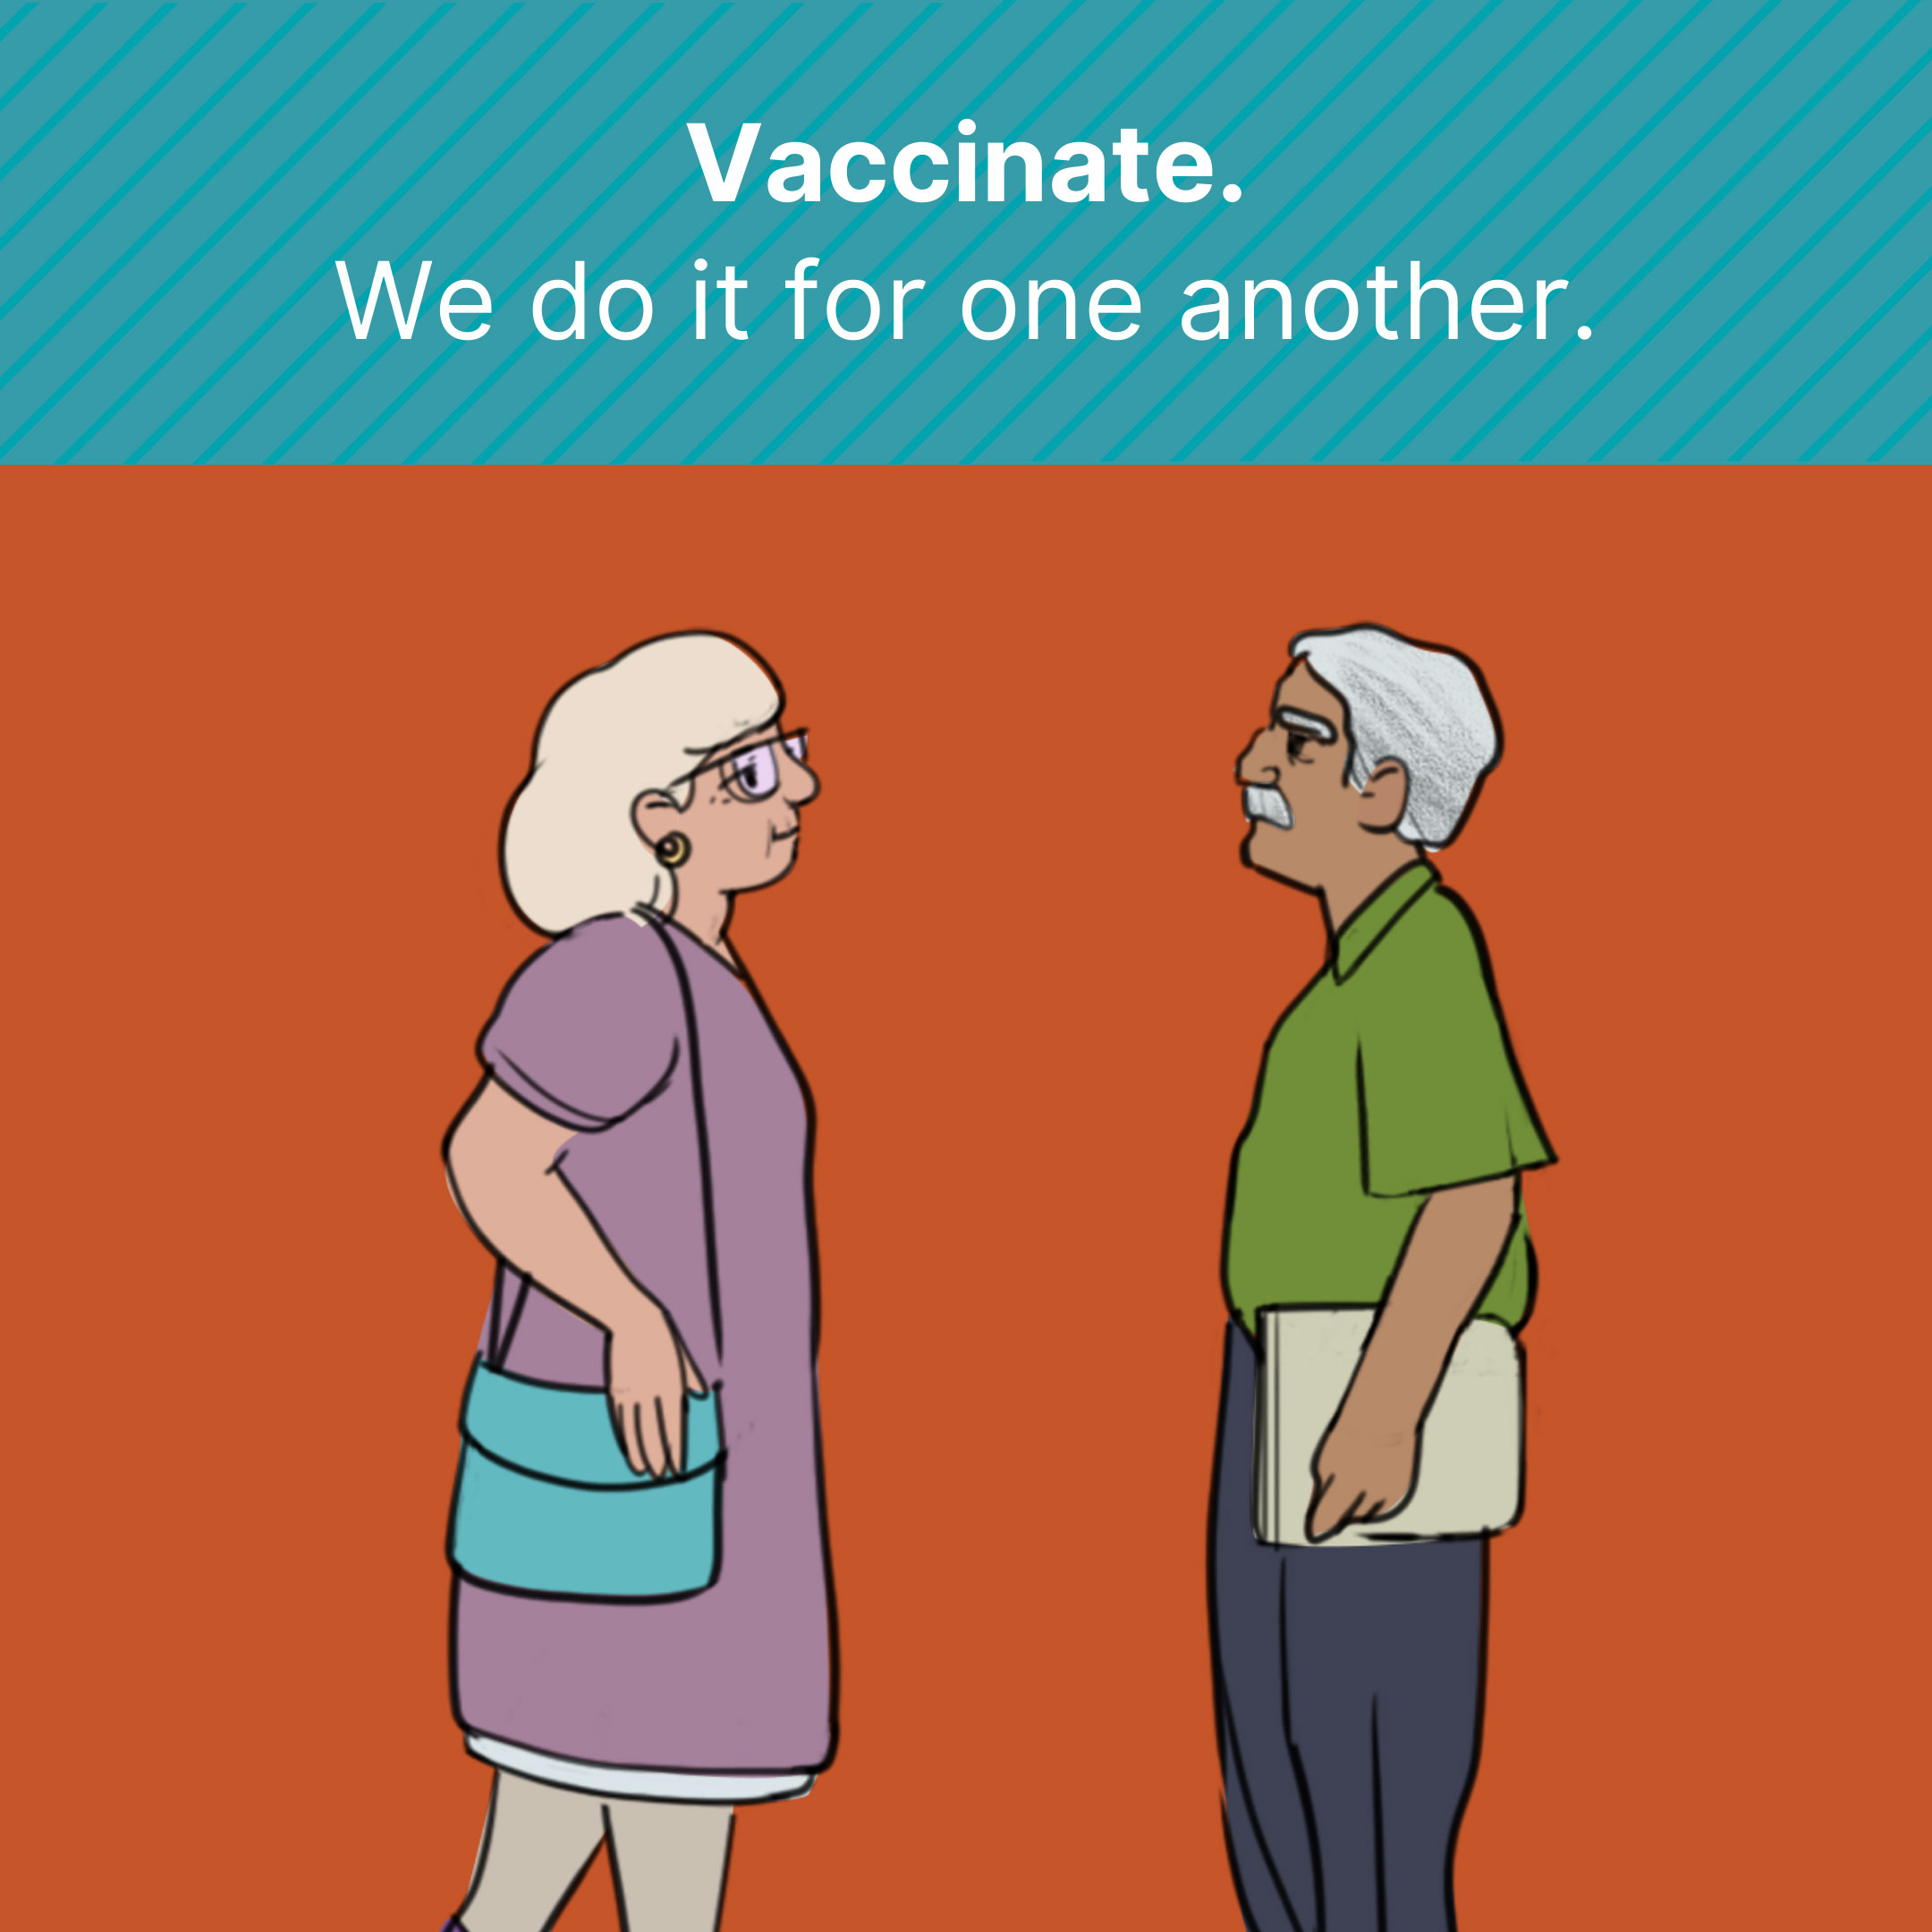 Old lady and old man looking at each other. Text says: Vaccinate. We do it for one another.